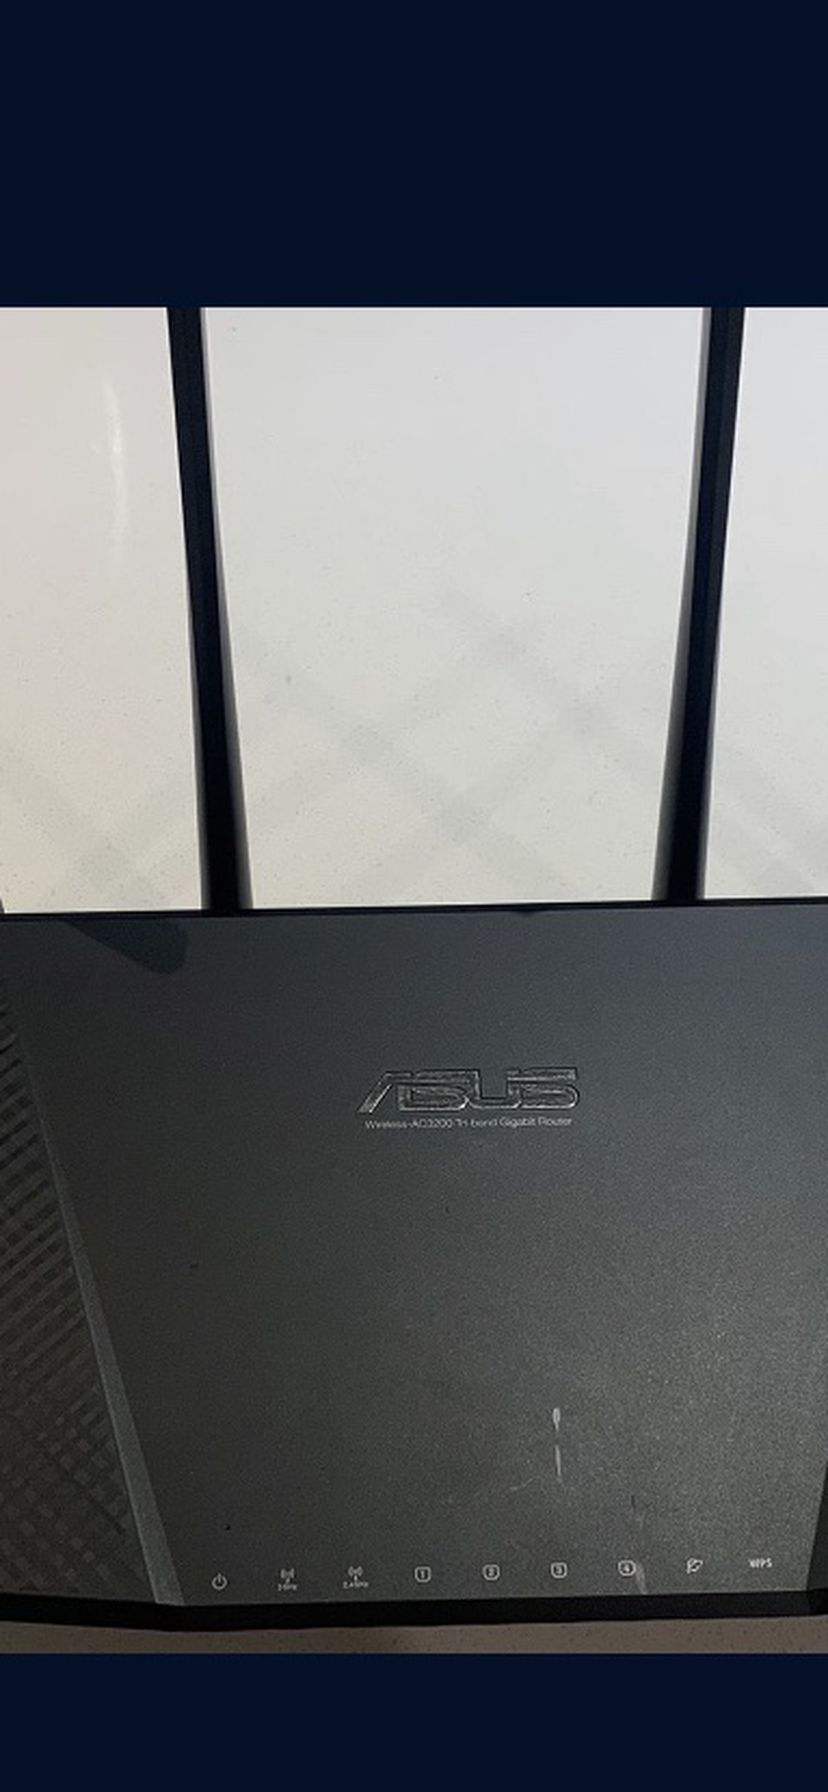 ASUS RT-AC3200 Tri Band Wireless Router